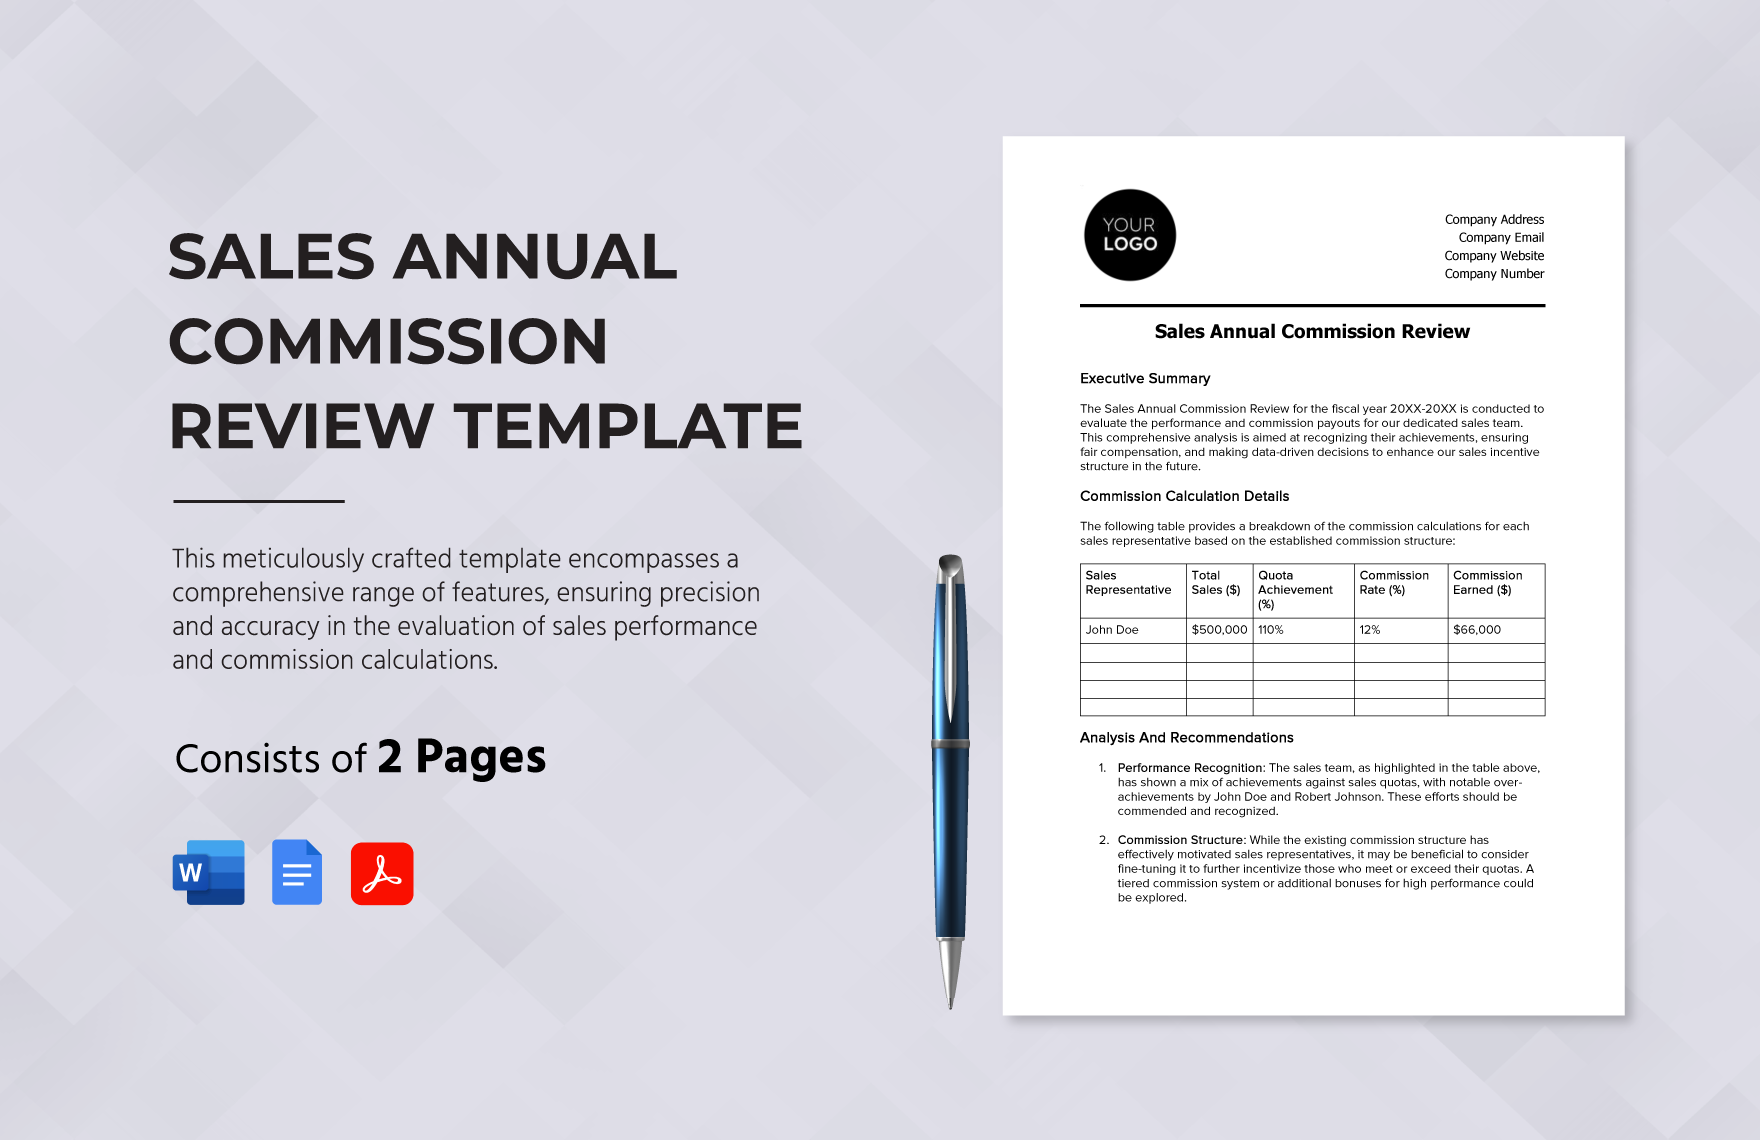 Sales Annual Commission Review Template